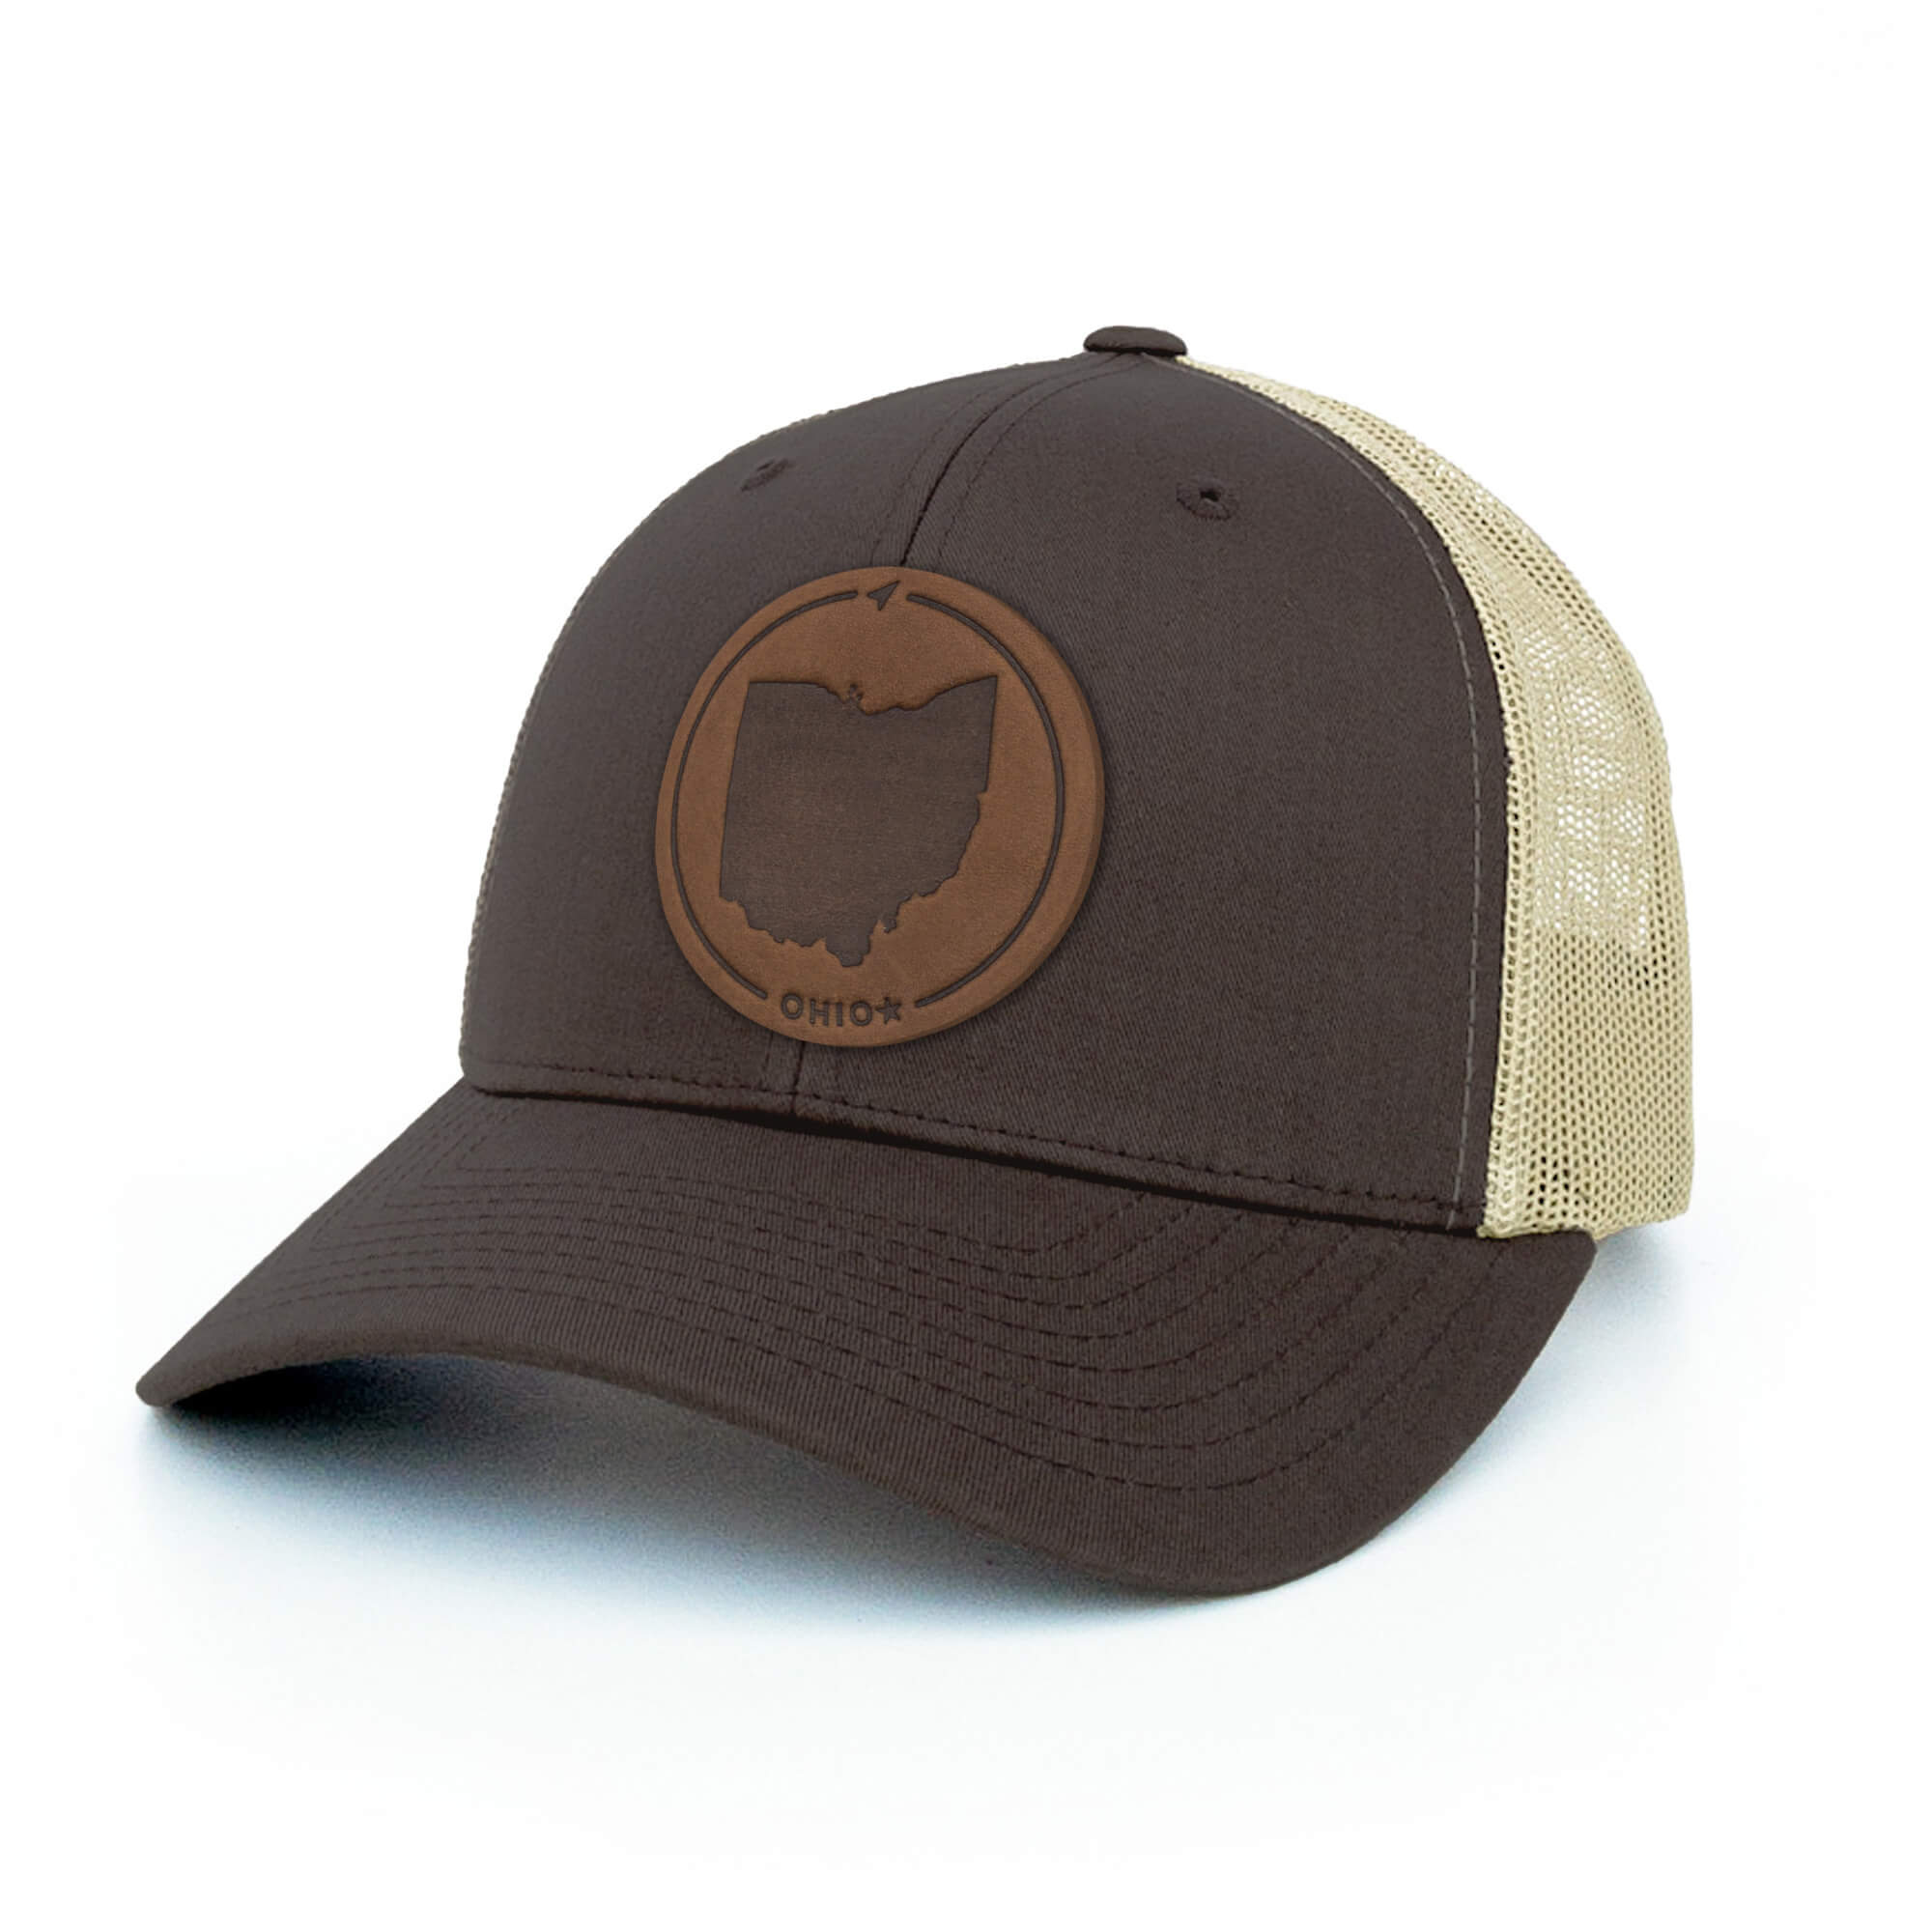 Brown Khaki trucker hat with full-grain leather patch of Ohio | BLACK-003-004, CHARC-003-004, NAVY-003-004, HGREY-003-004, MOSS-003-004, BROWN-003-004  Edit alt text